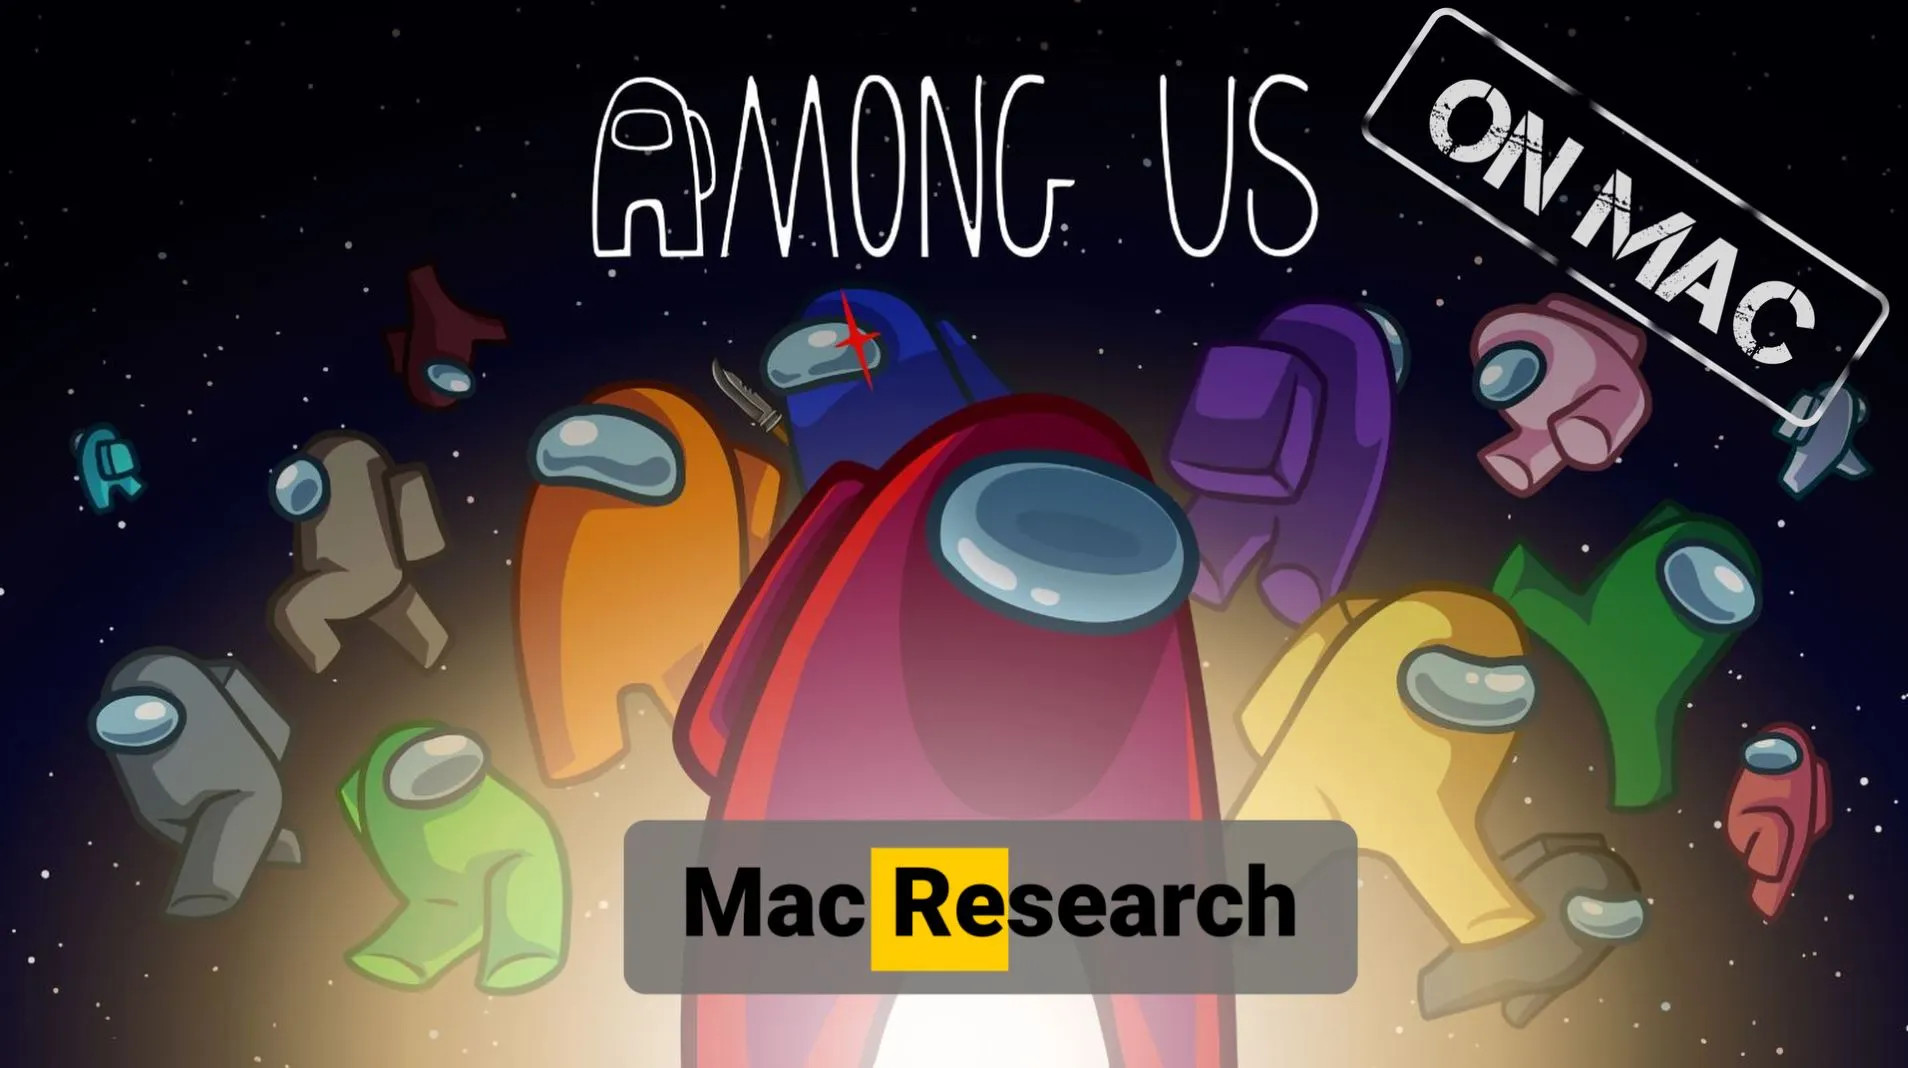 How to Play Among Us on Mac (Apple Silicon and Intel Models): The Fullest Guide